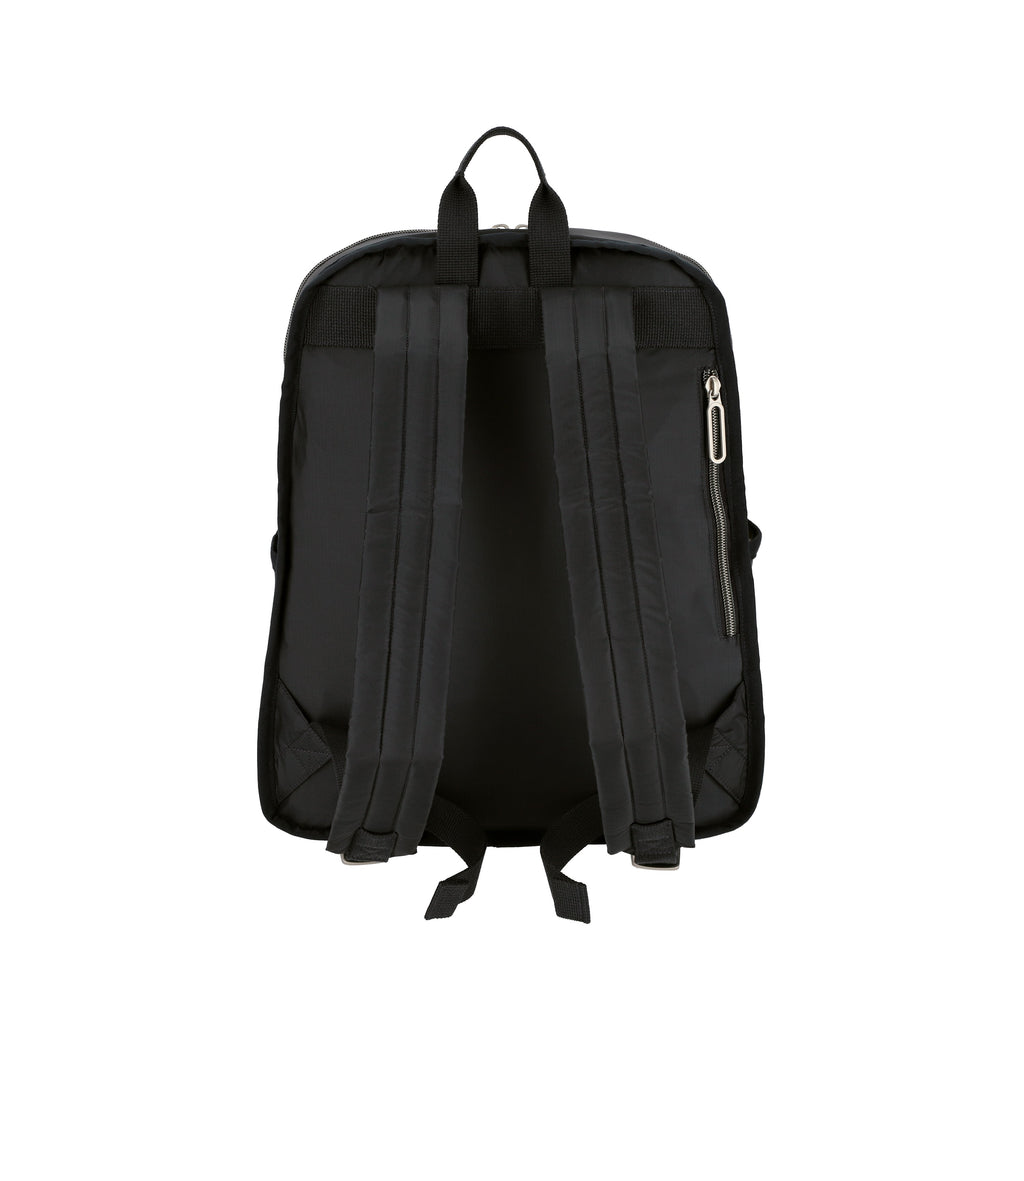 Lesportsac Functional Backpack - Limelight C